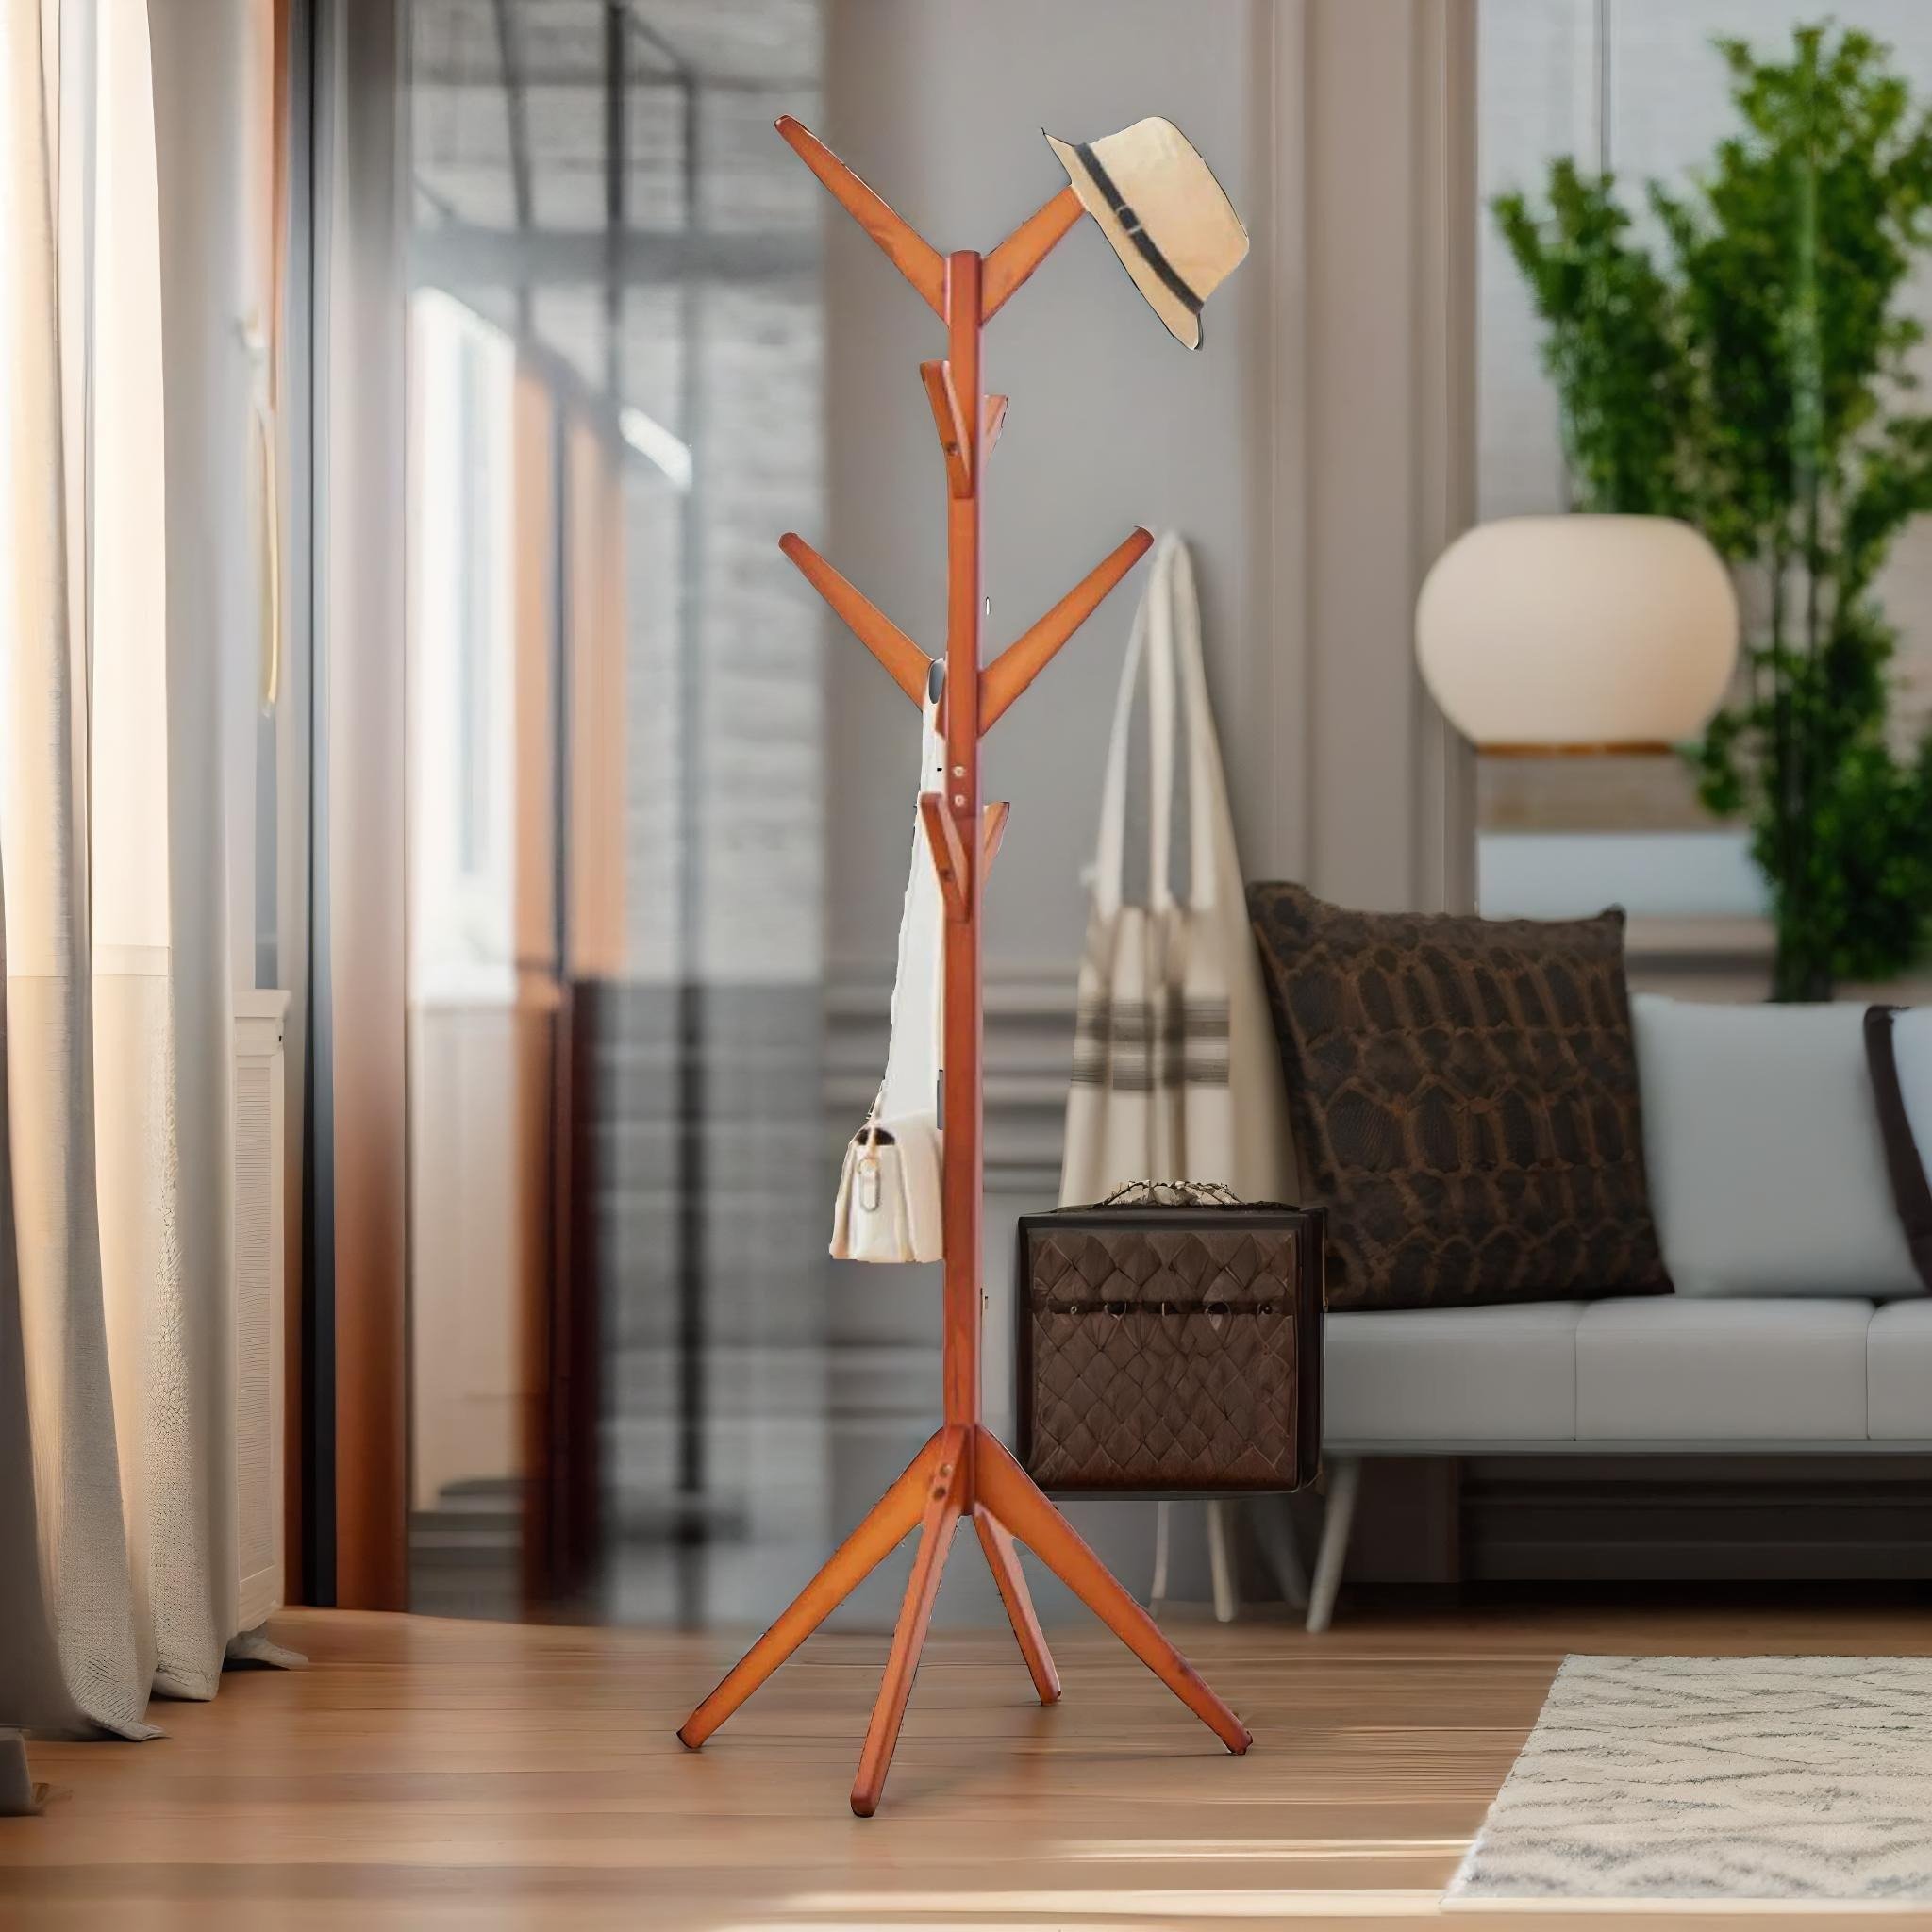 Wooden Coat Stand With 8 Hooks - image 1